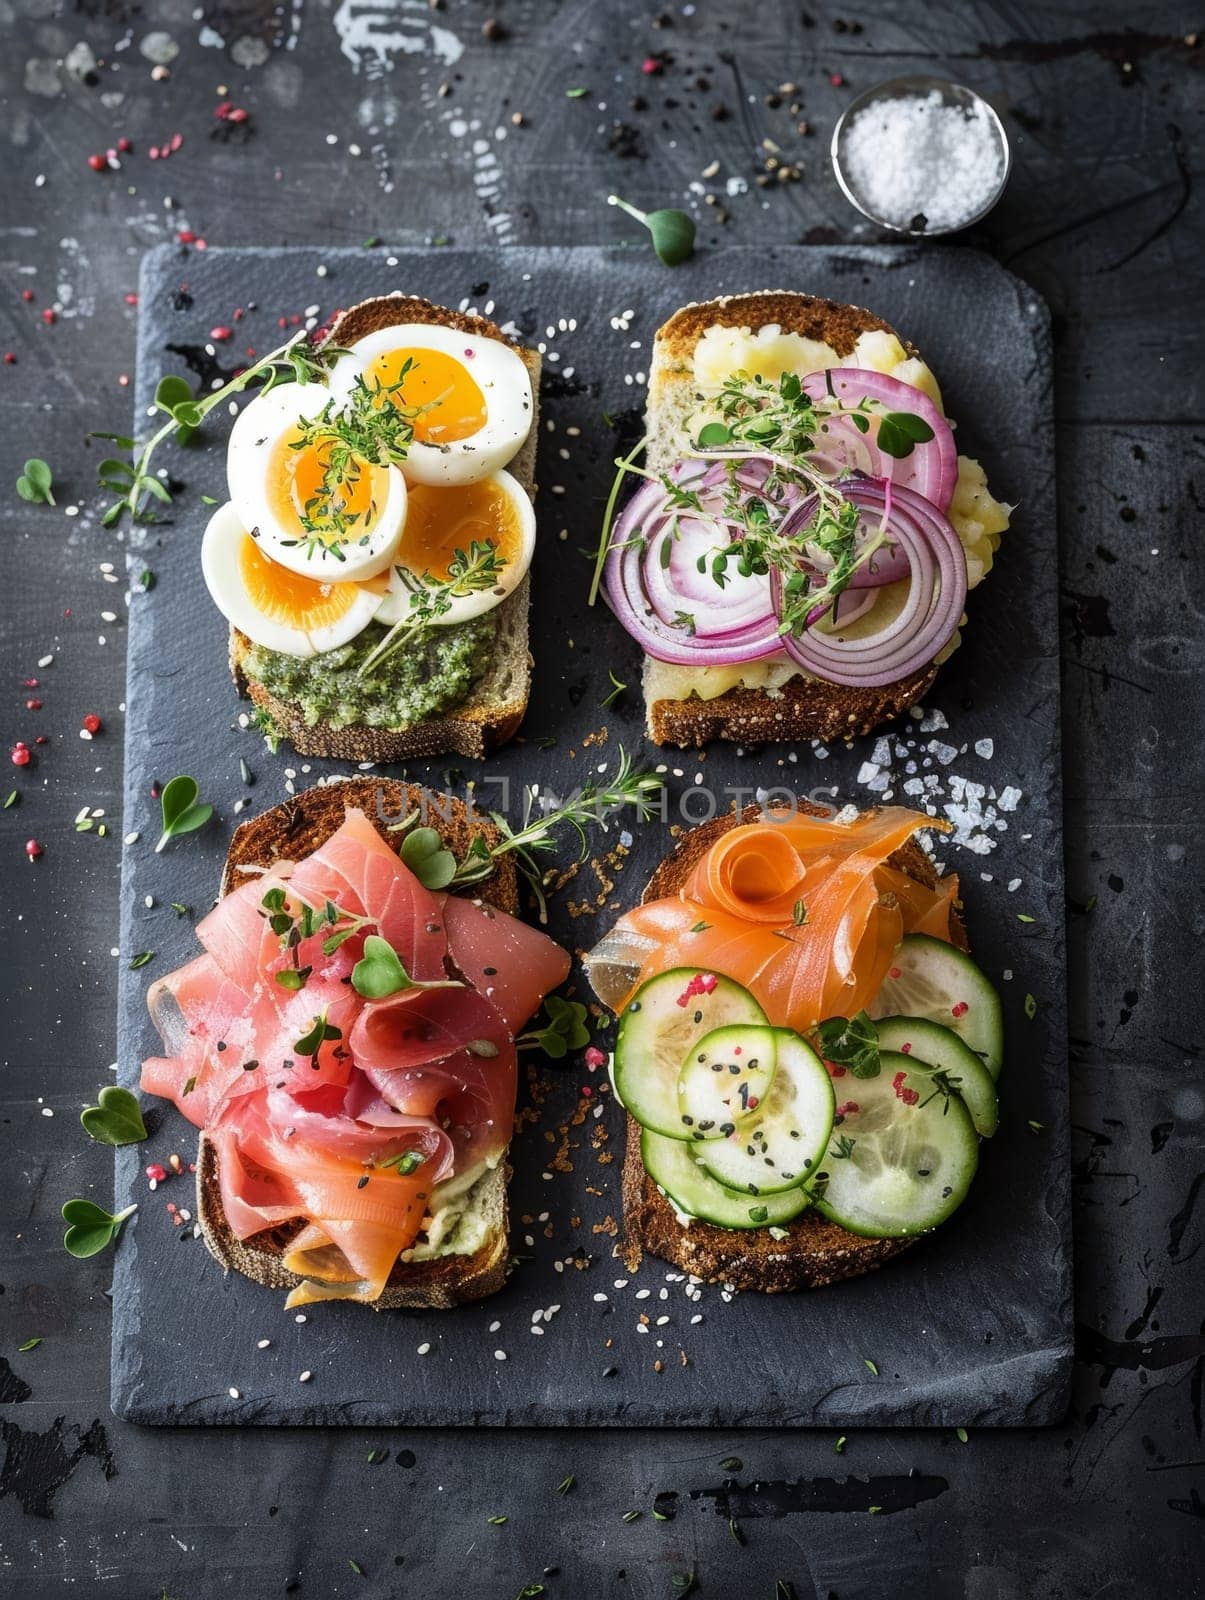 Authentic Danish smorrebrod, a selection of open-faced sandwiches with various savory toppings, elegantly presented on a slate plate - a mouthwatering representation of the rich culinary traditions. by sfinks